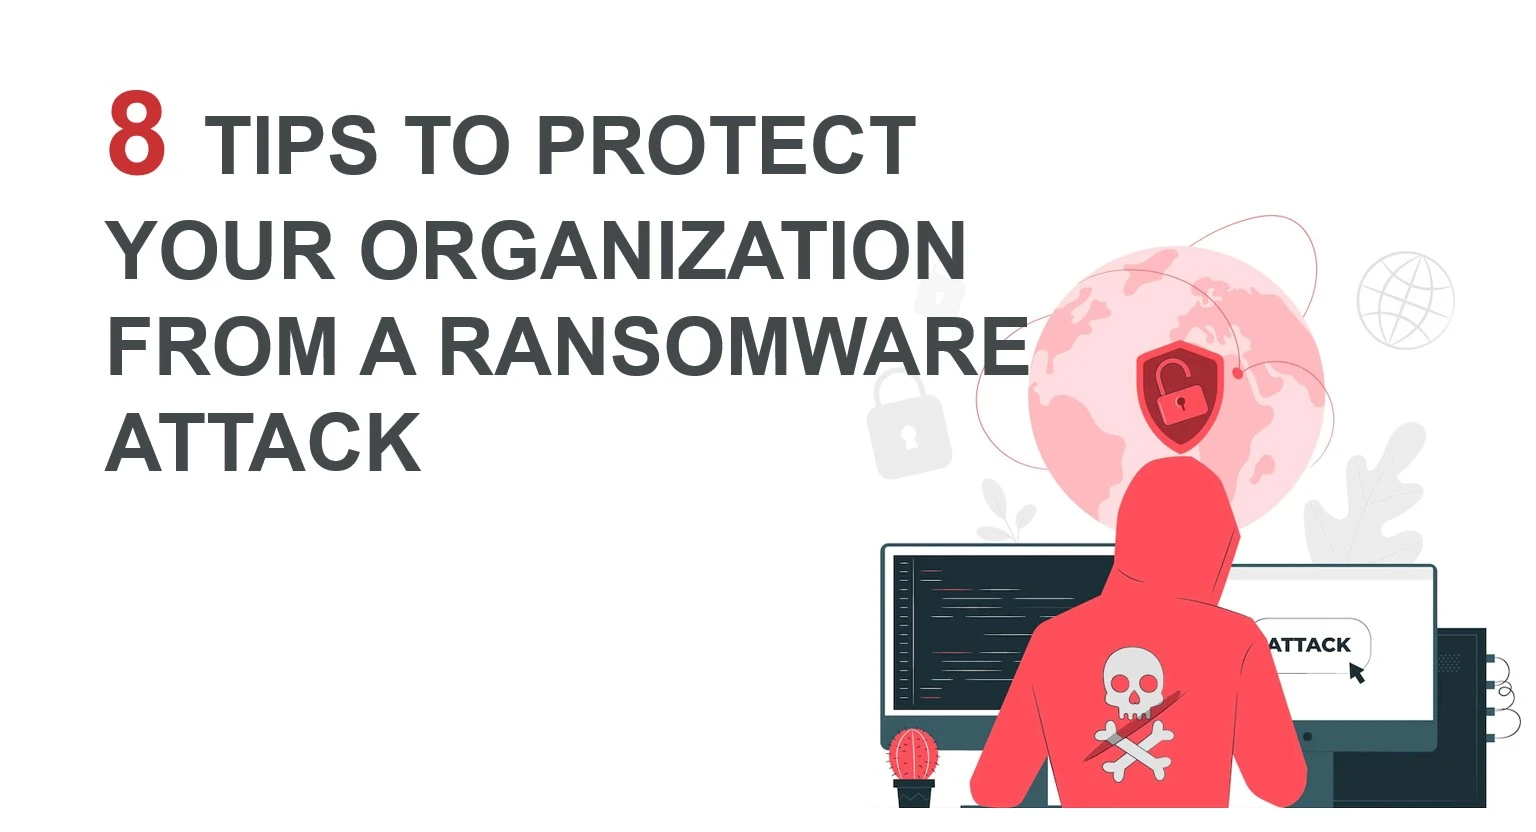 8 Tips To Protect Your Organization From A Ransomware Attack